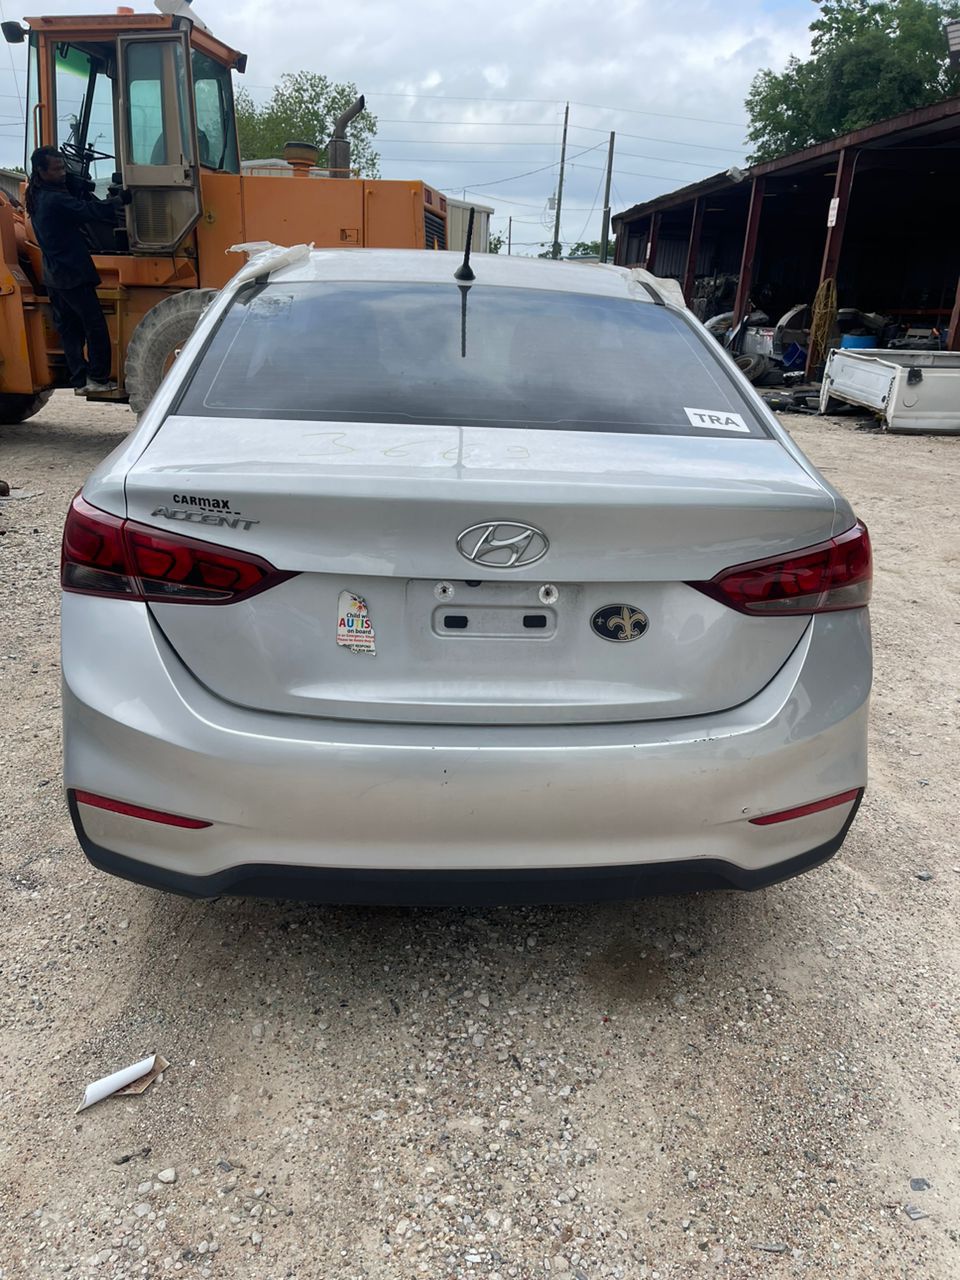 2018 Hyundai Accent For Parts 